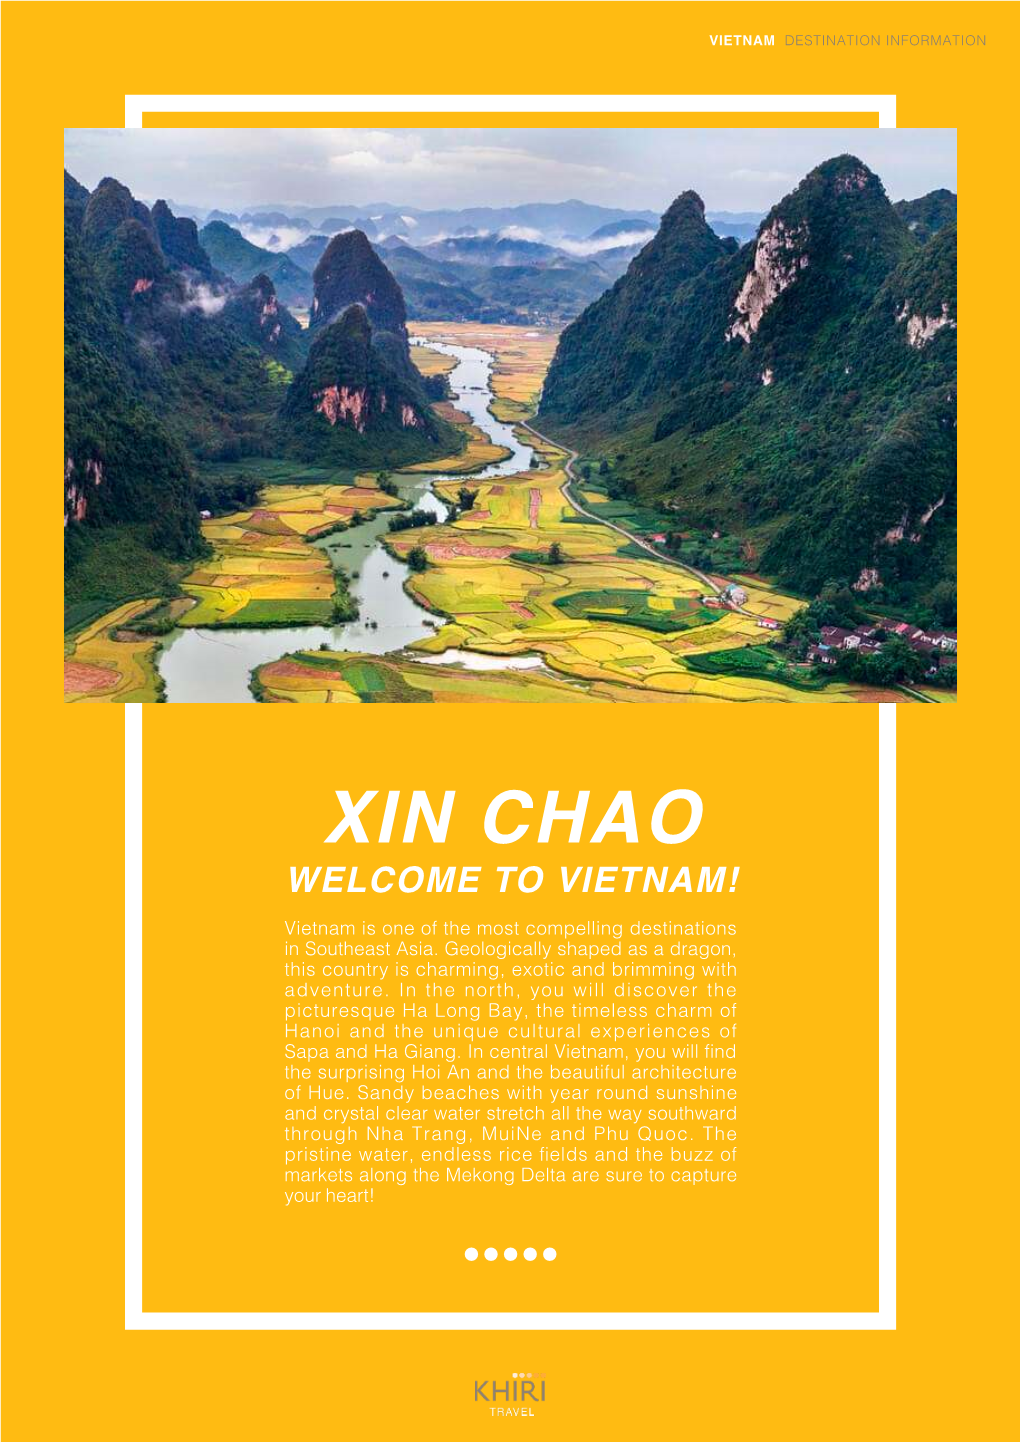 Xin Chao Welcome to Vietnam!